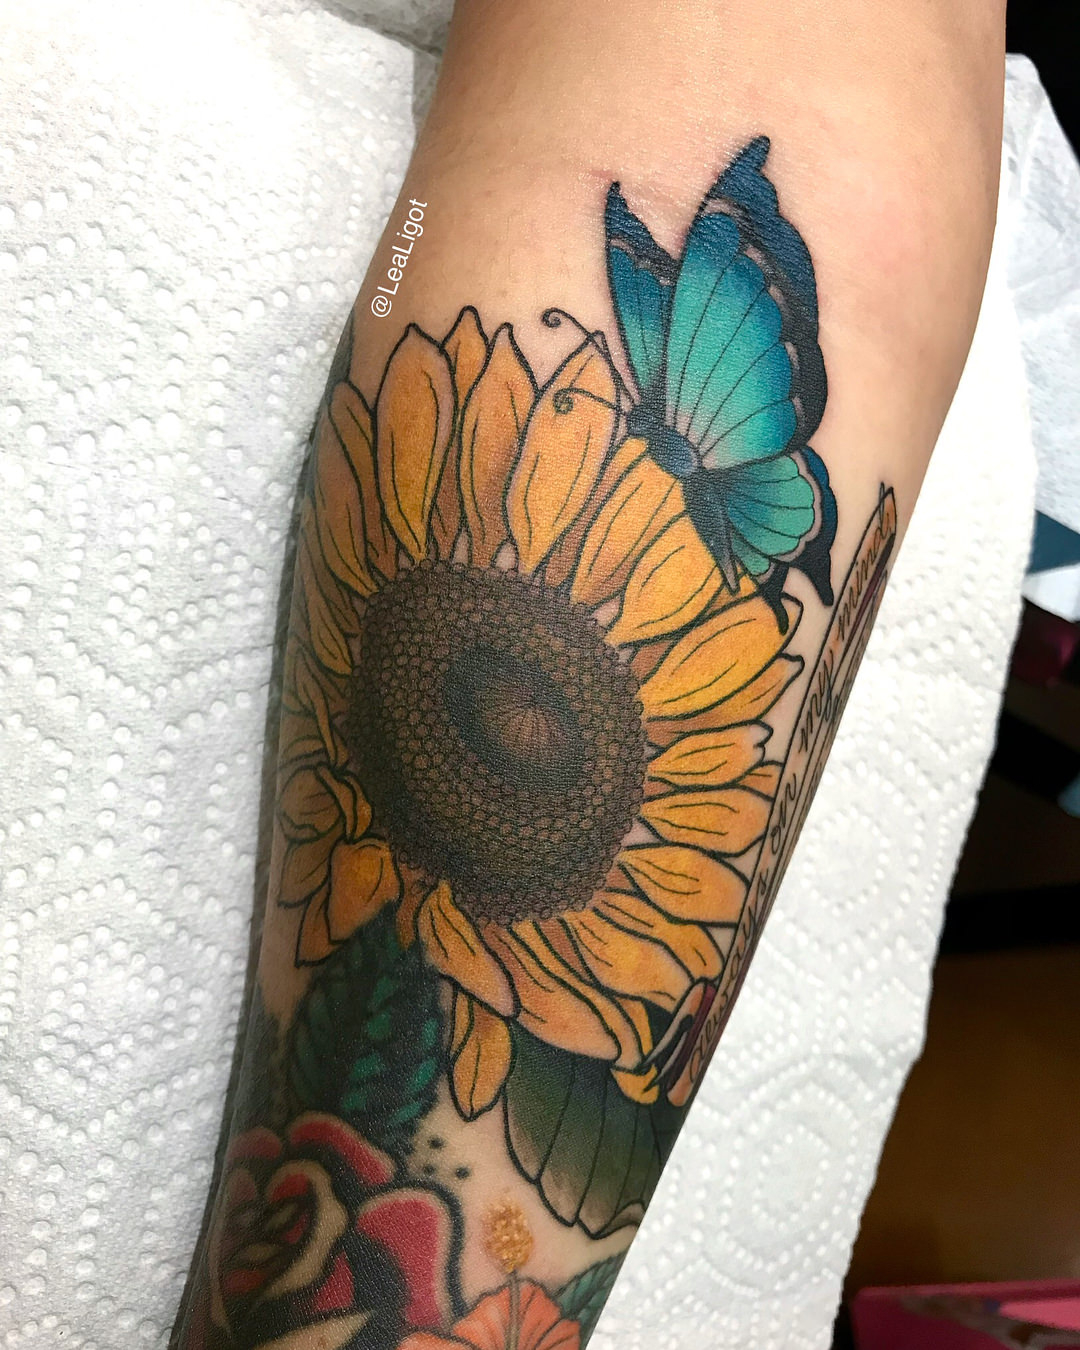 144 Sunflower Tattoos That Will Brighten Up Your Life regarding dimensions 1080 X 1350